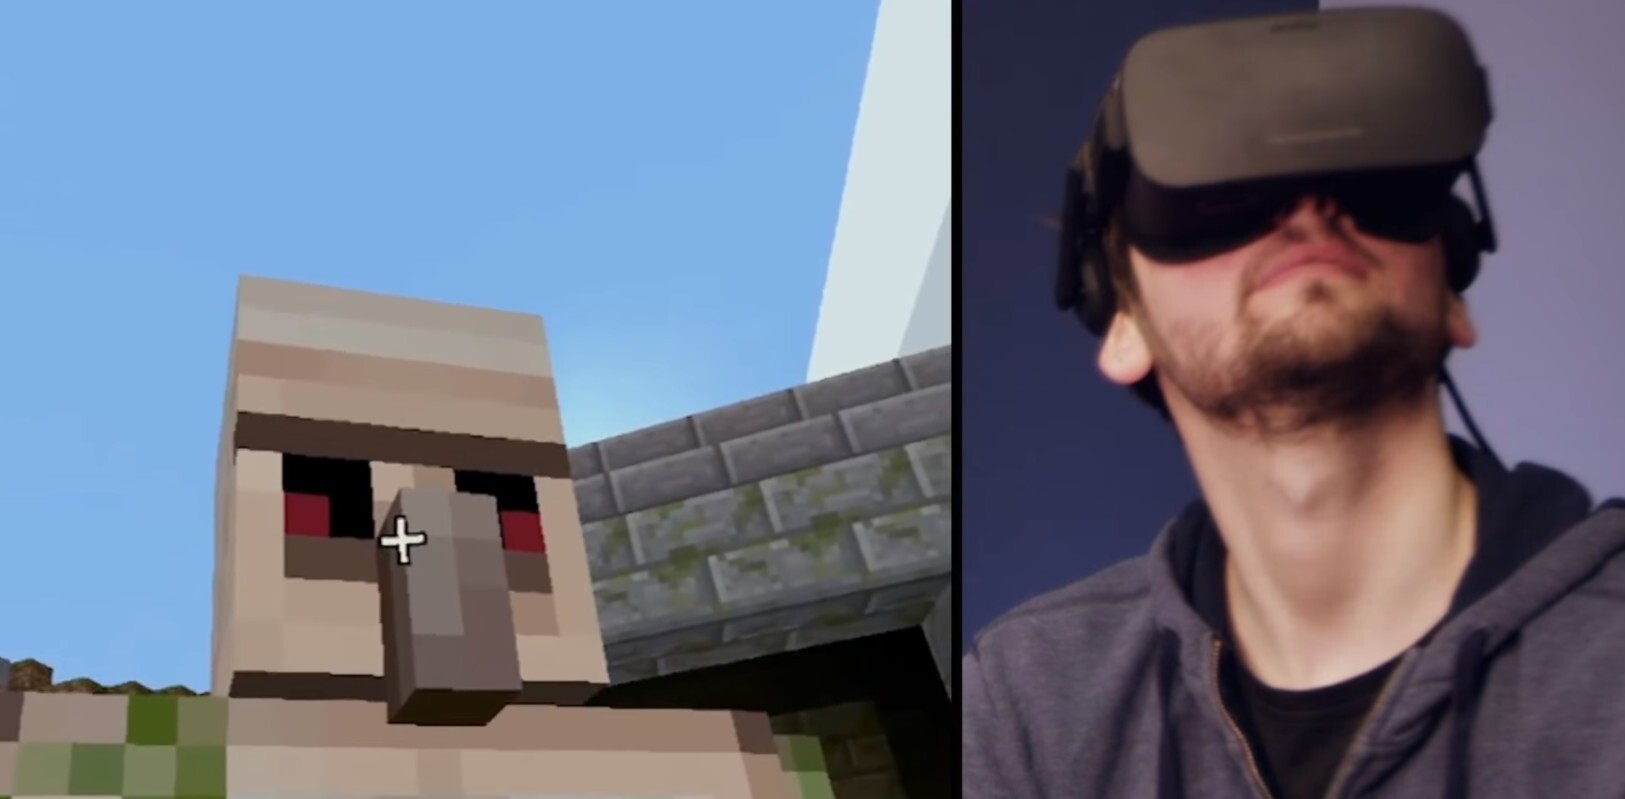 You can now play VR Minecraft on the Oculus Rift